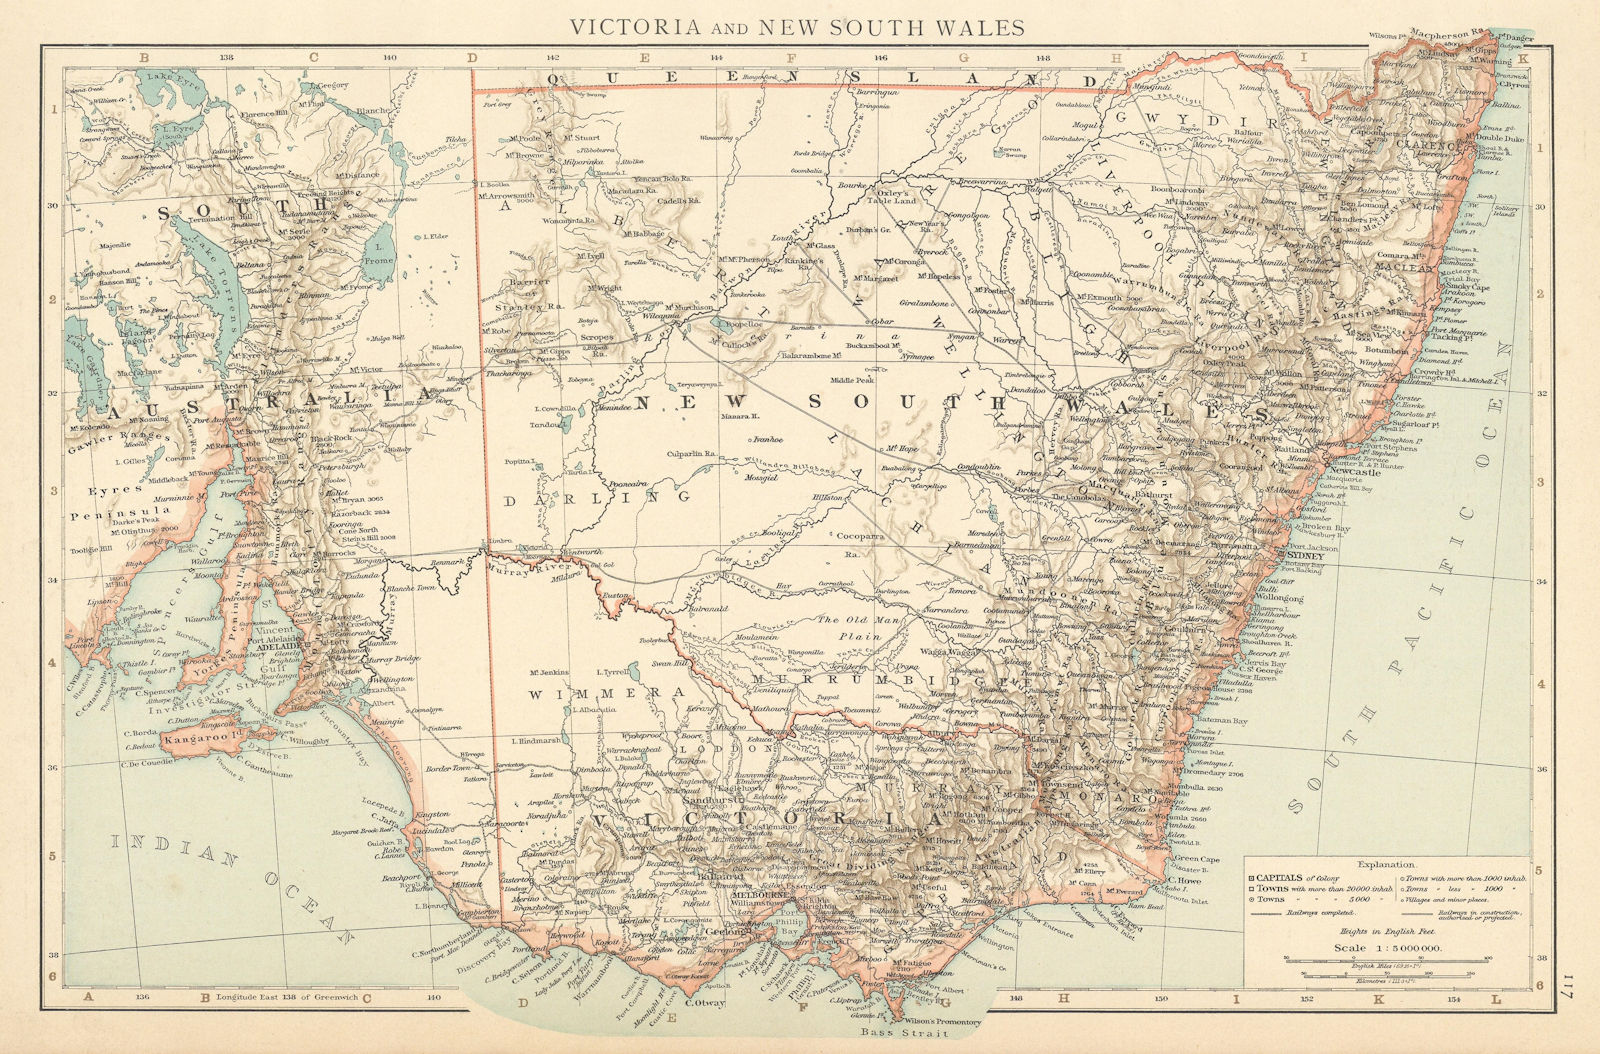 Victoria & New South Wales. Railways complete & planned Australia TIMES 1895 map